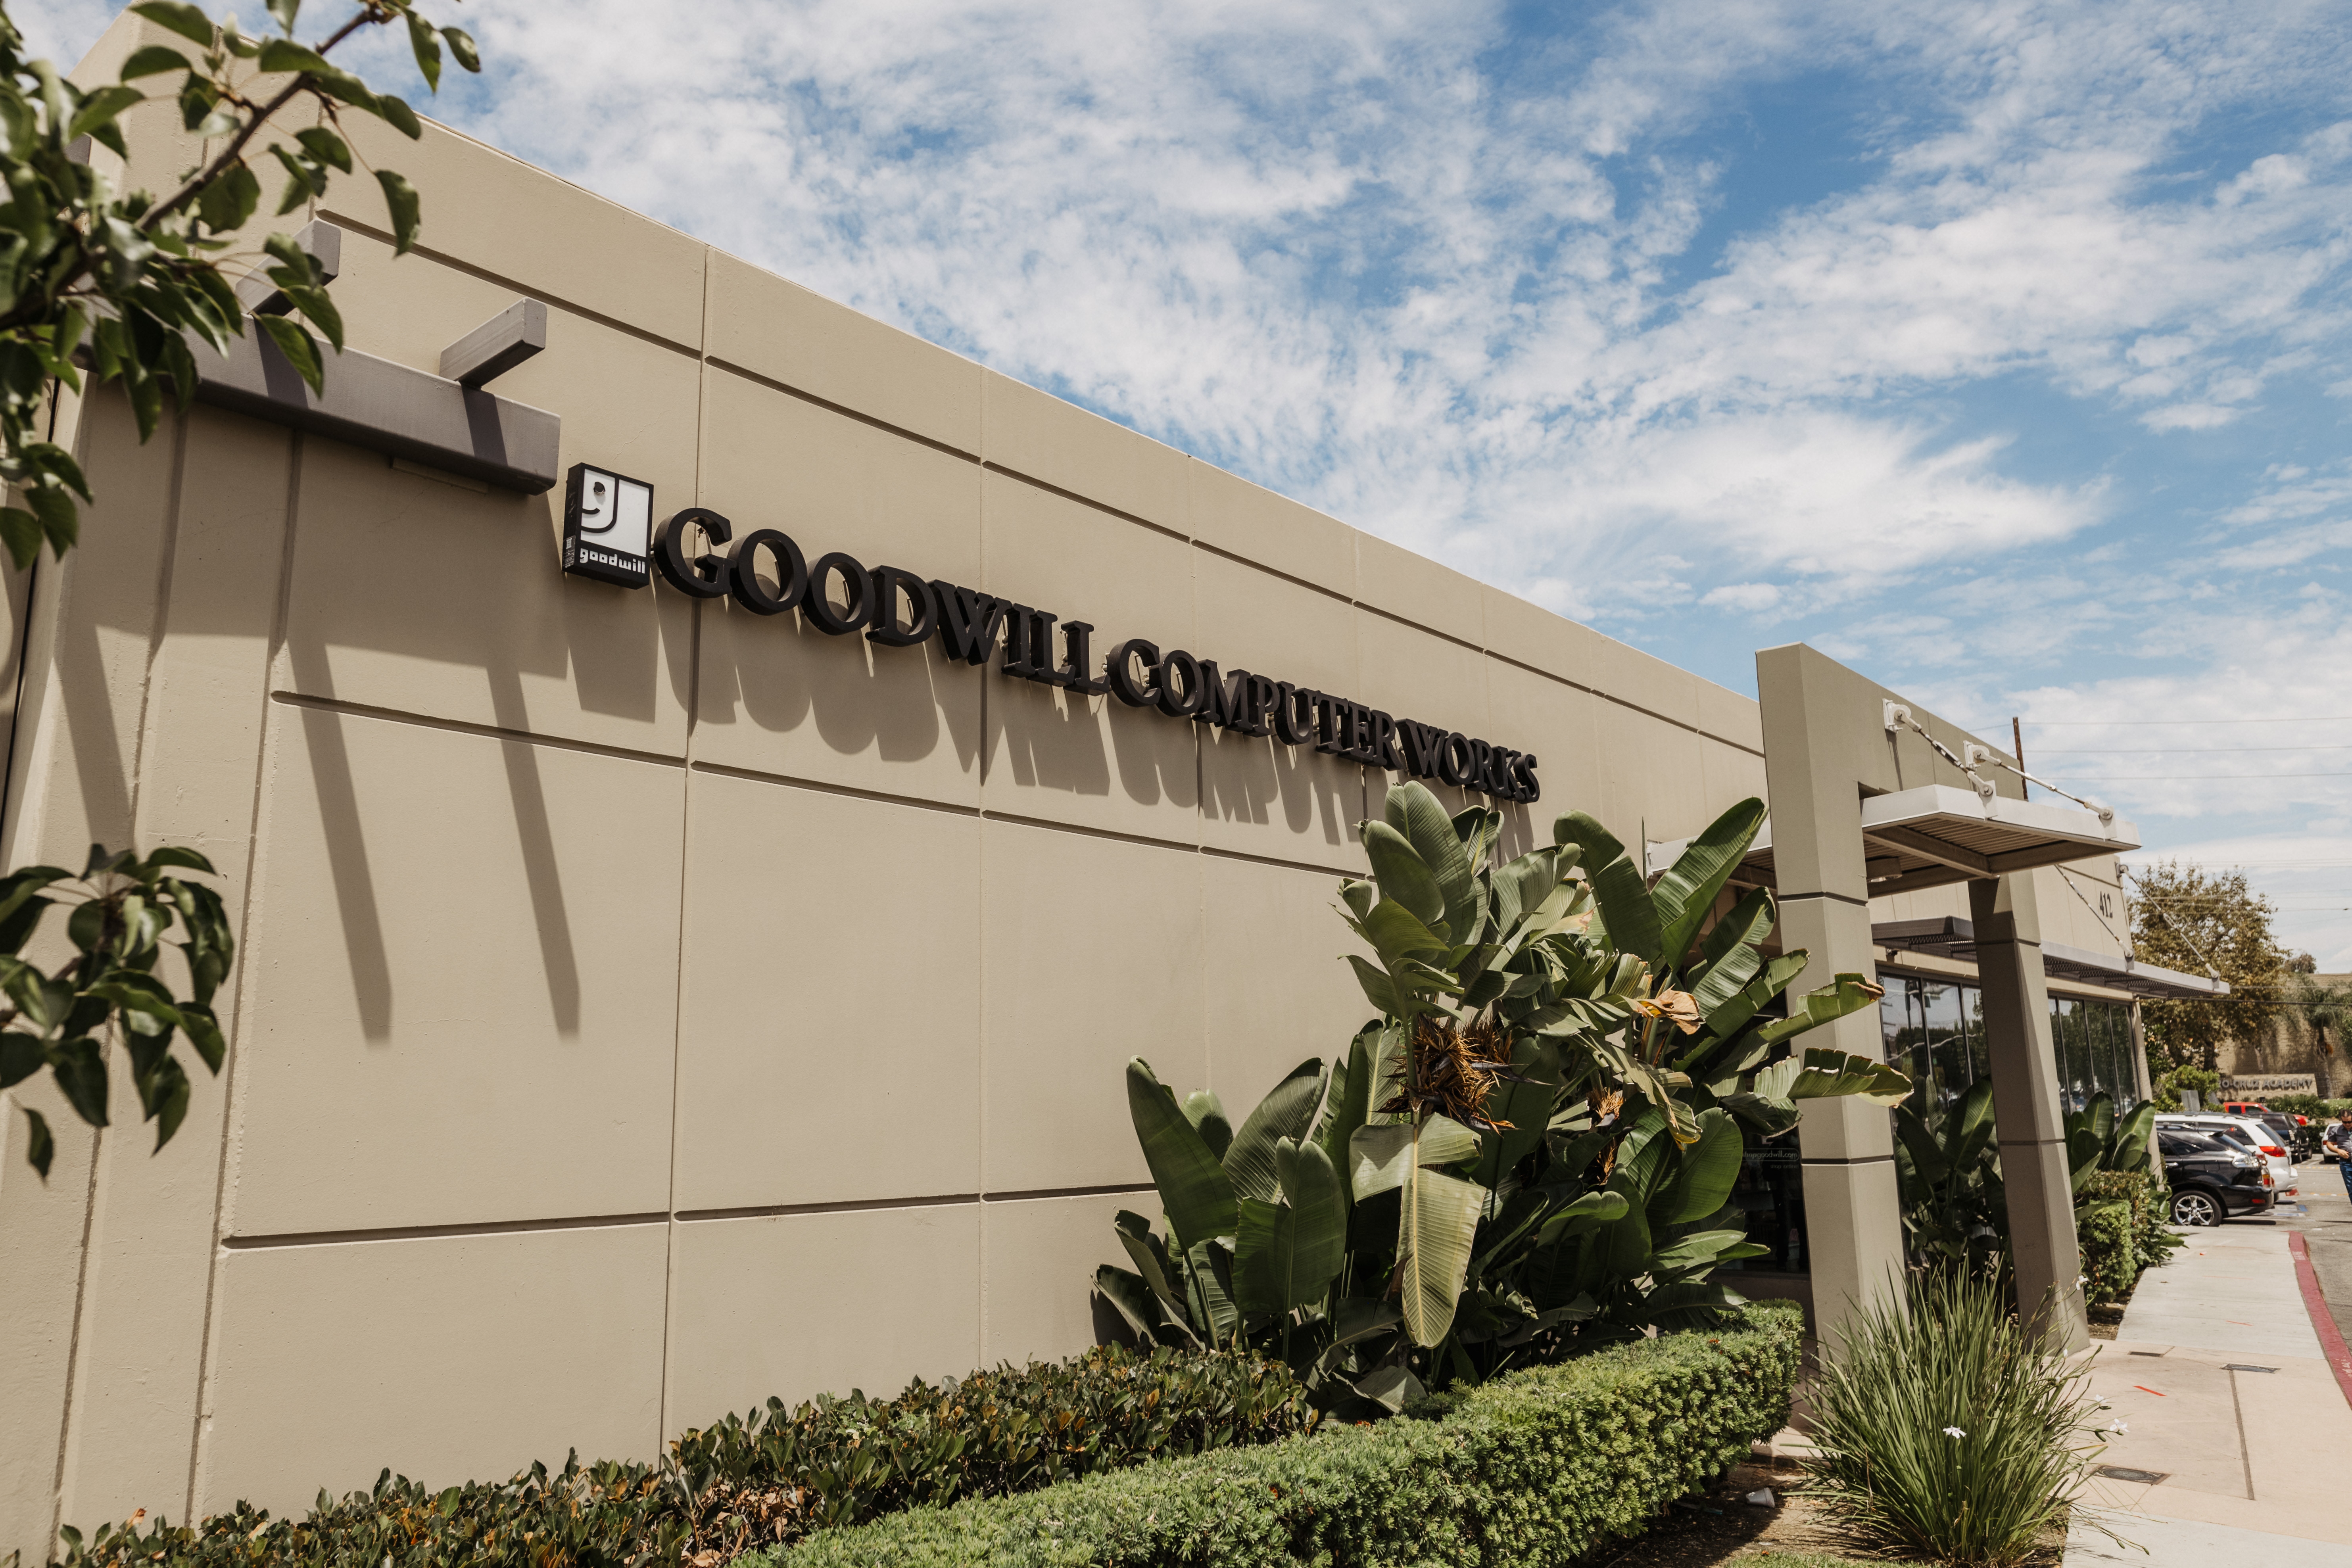  Goodwill Computer Works exterior image 